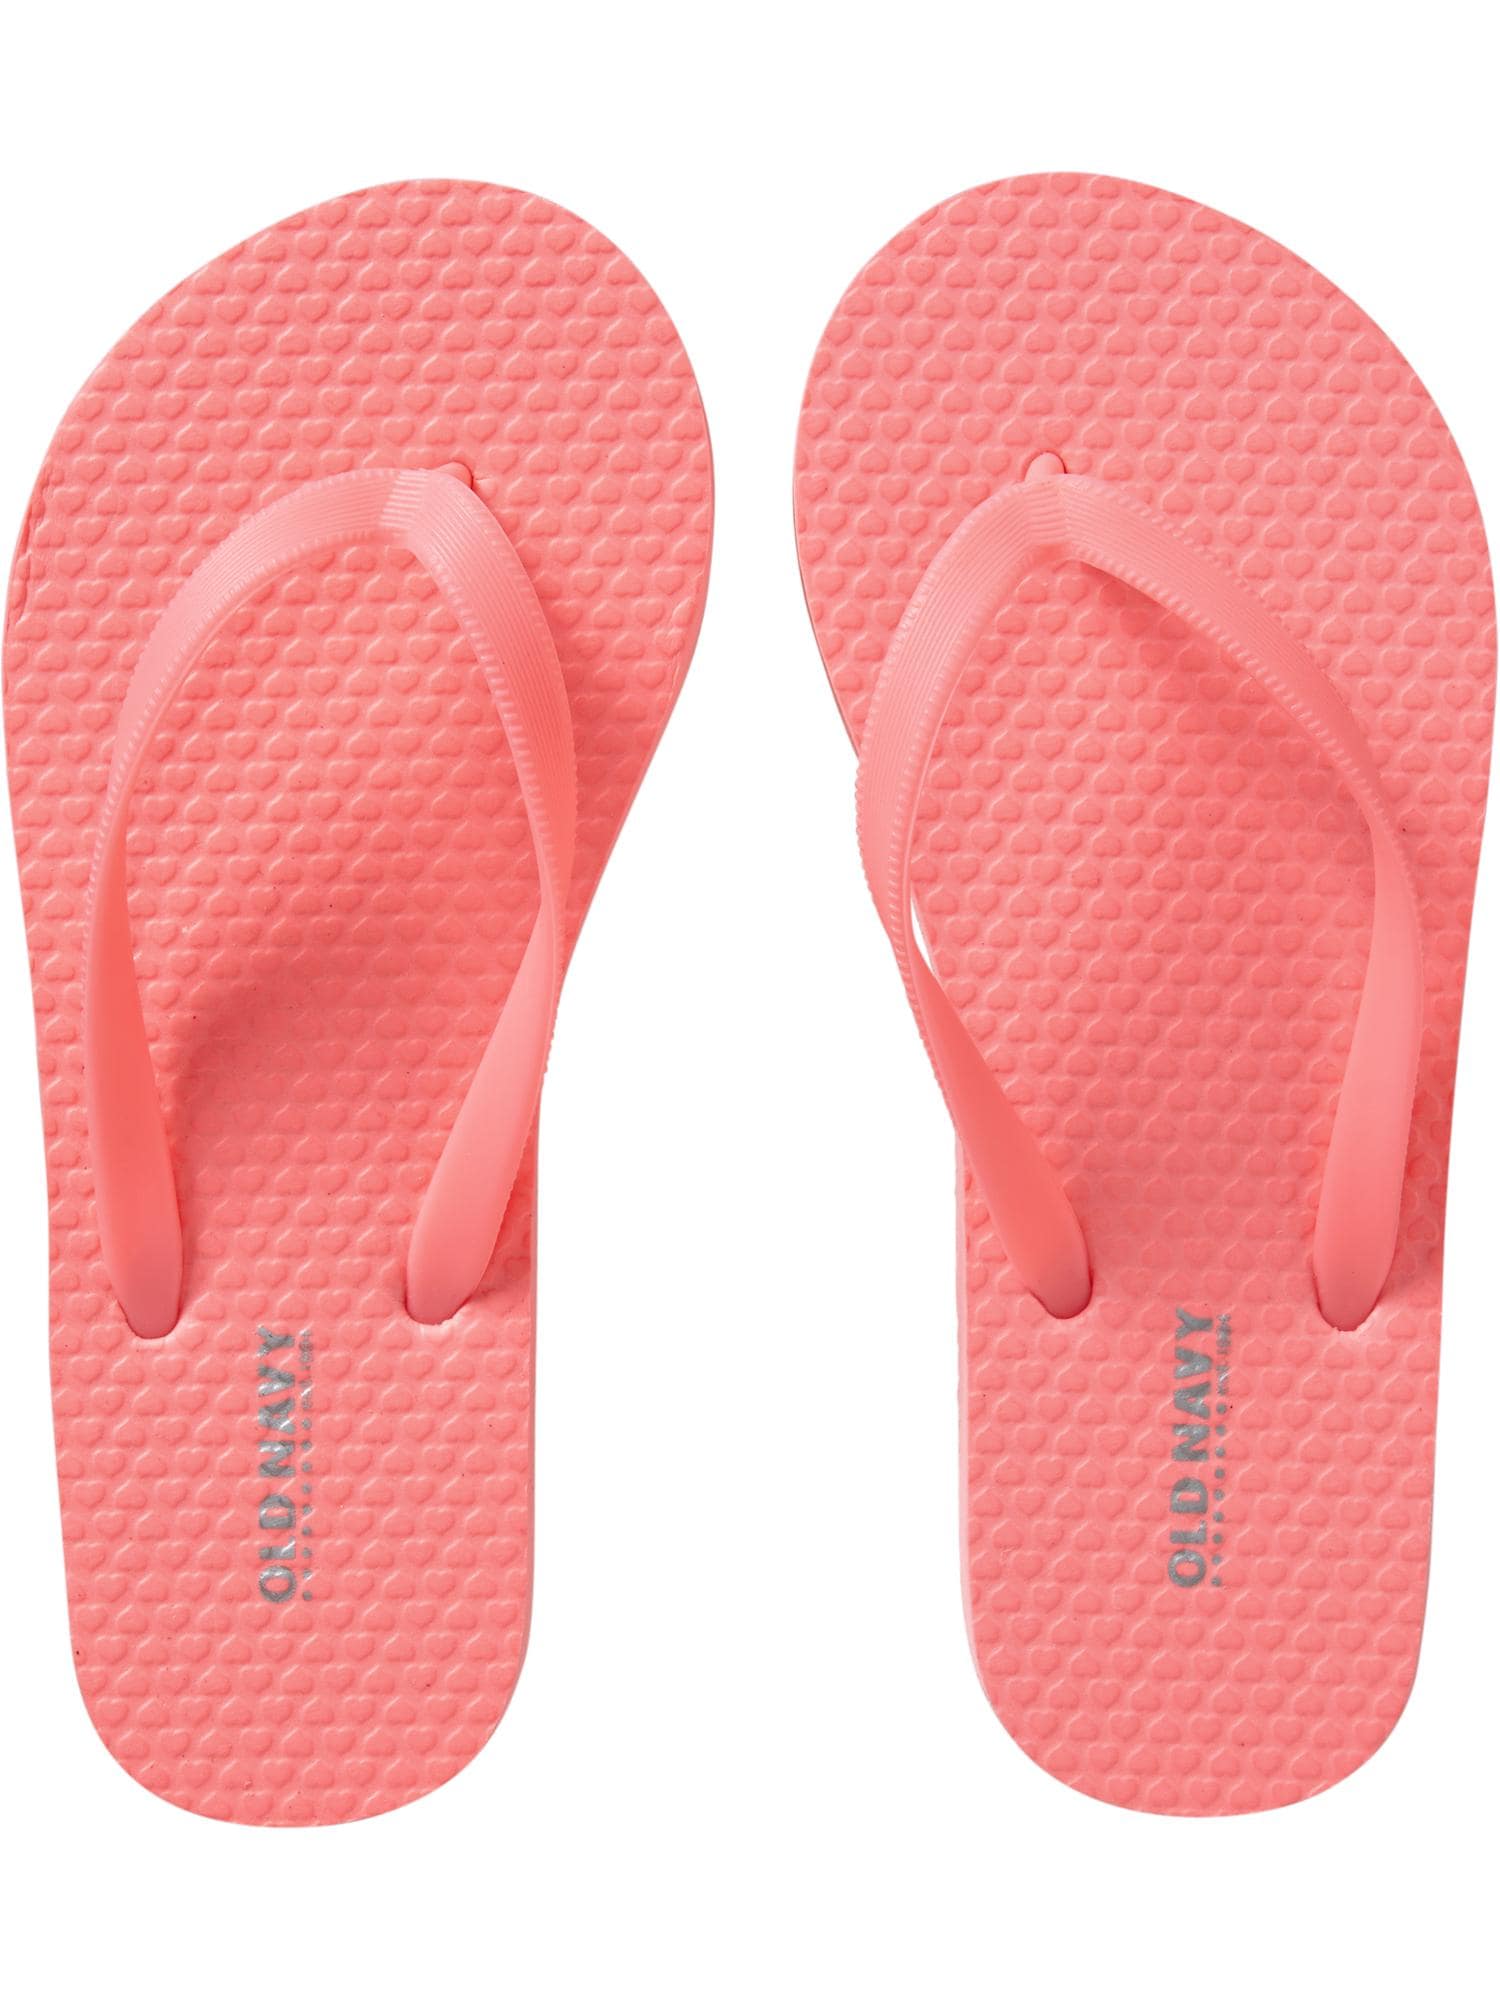 Wish I could wear only flip flops all year round : r/FemaleFlipFlops